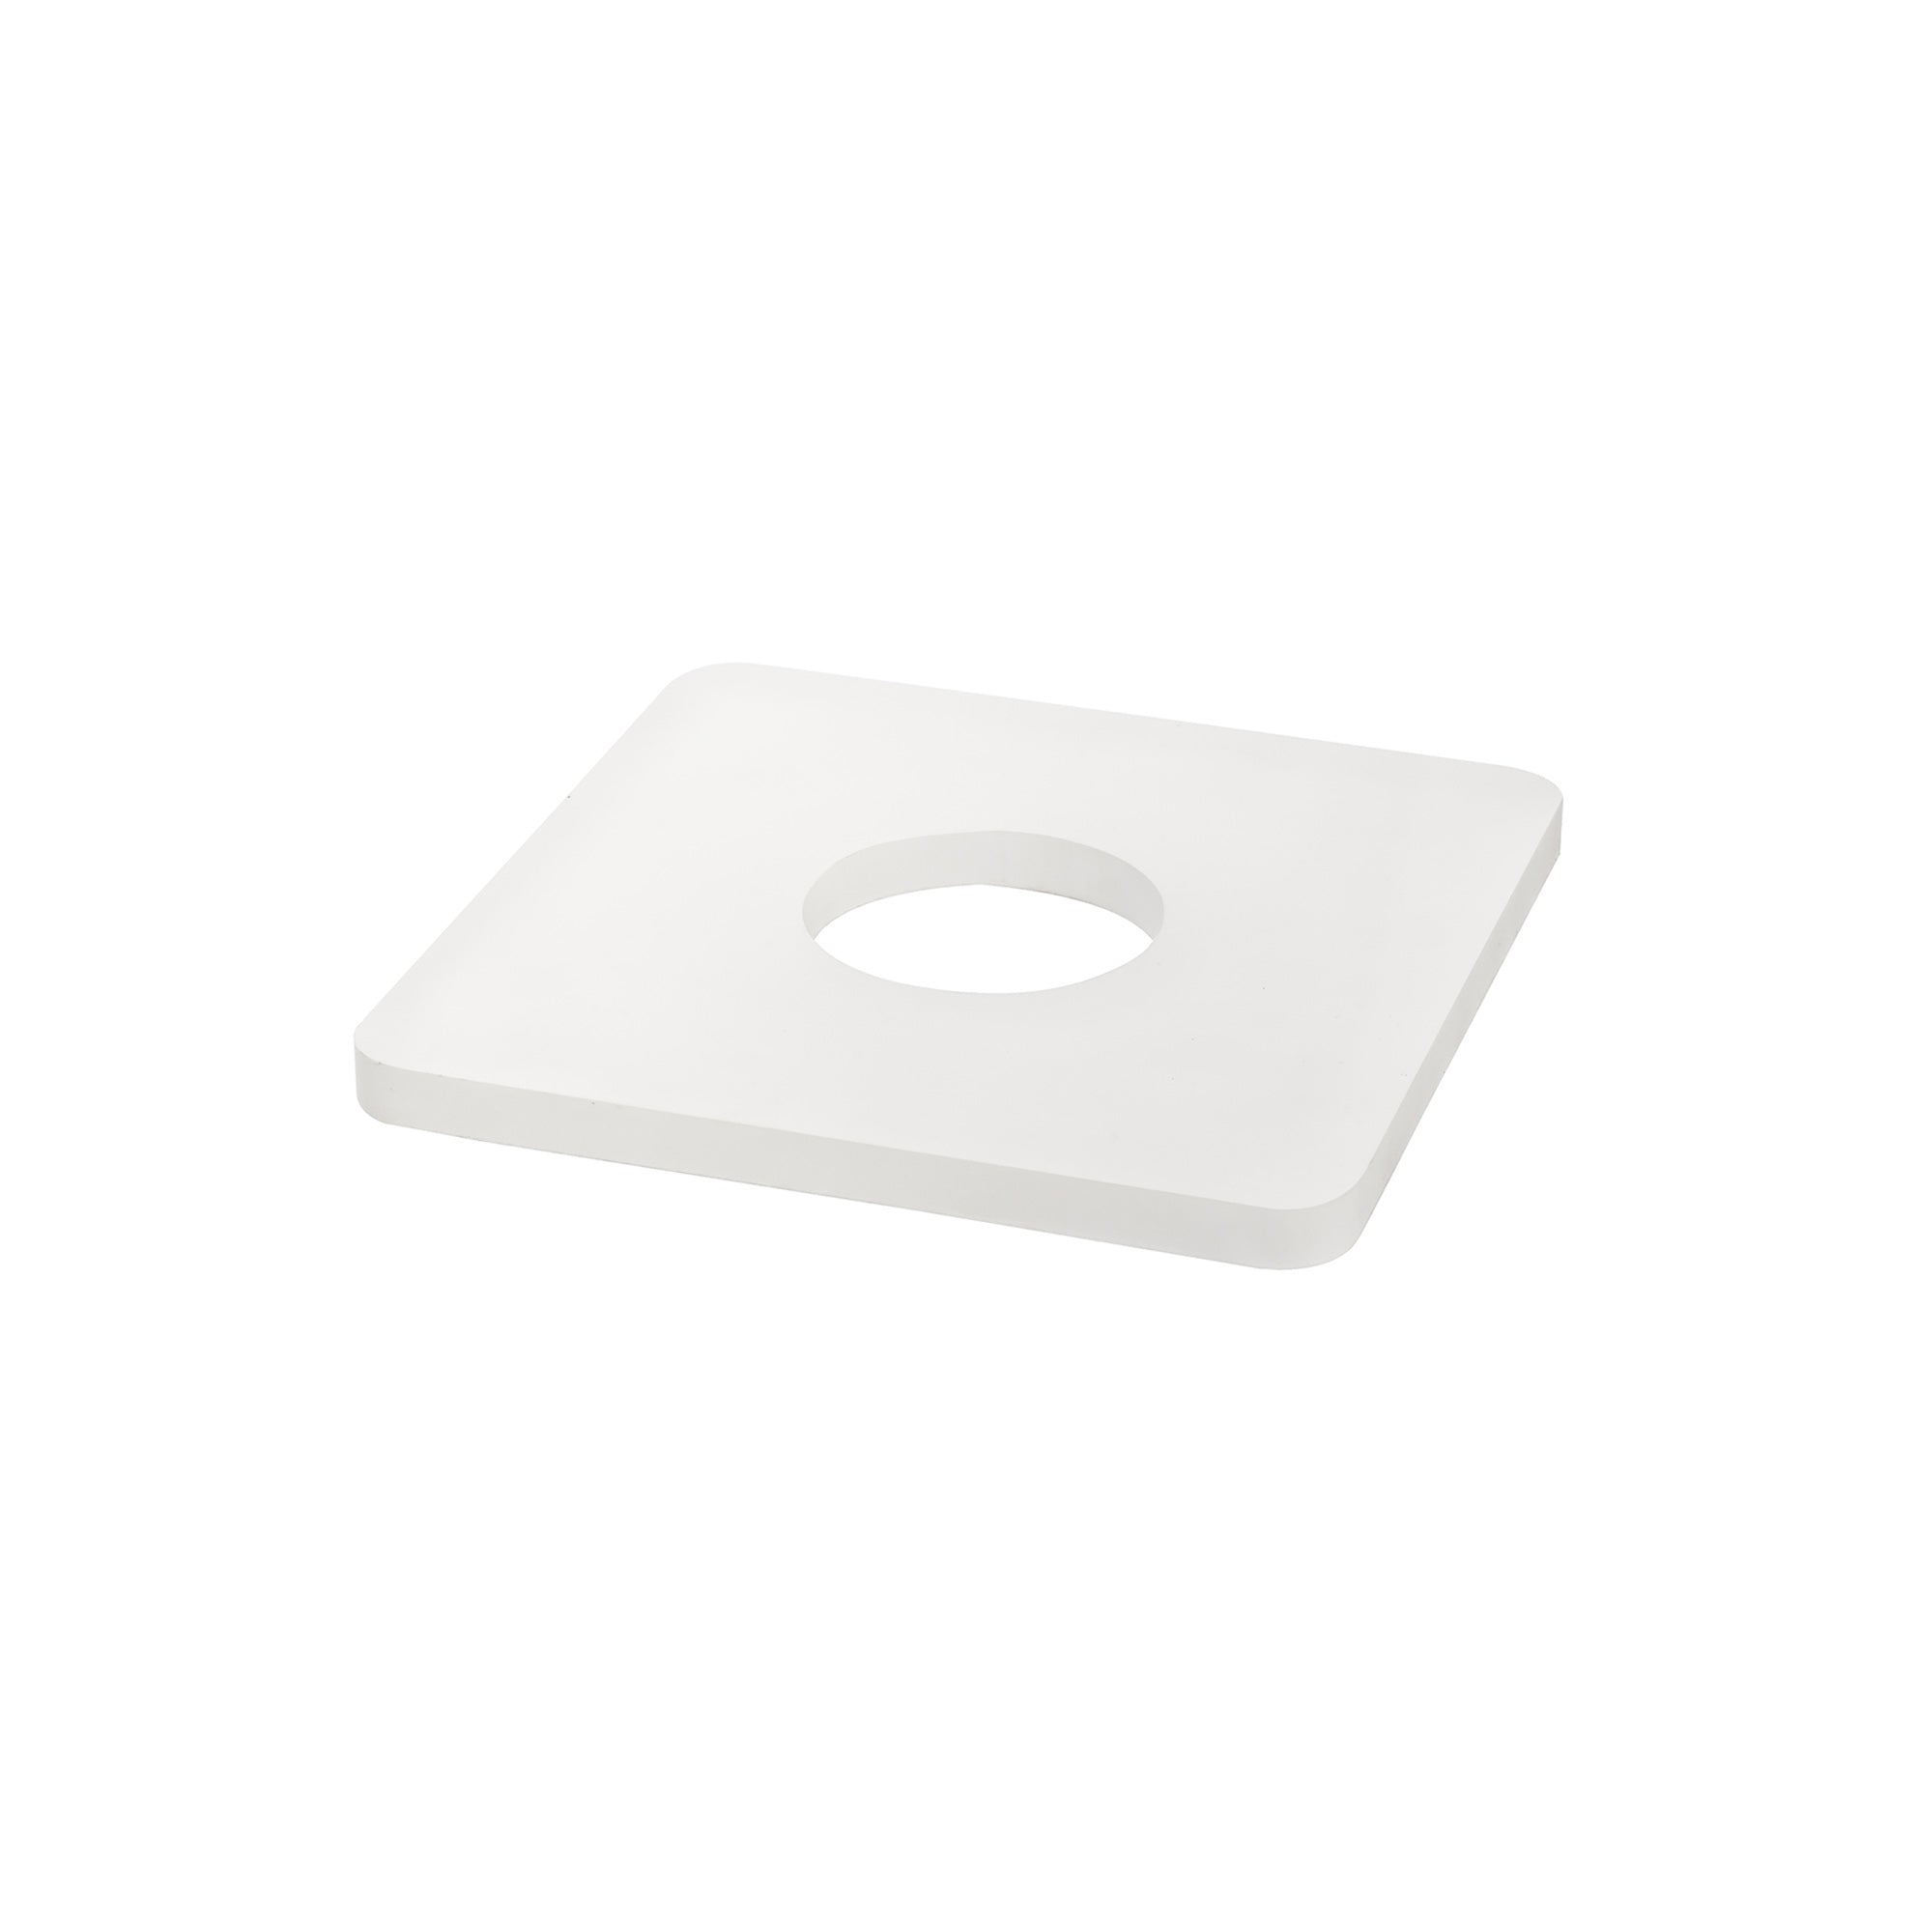 Modus 190mm Non-Electric Square Acrylic,Frosted